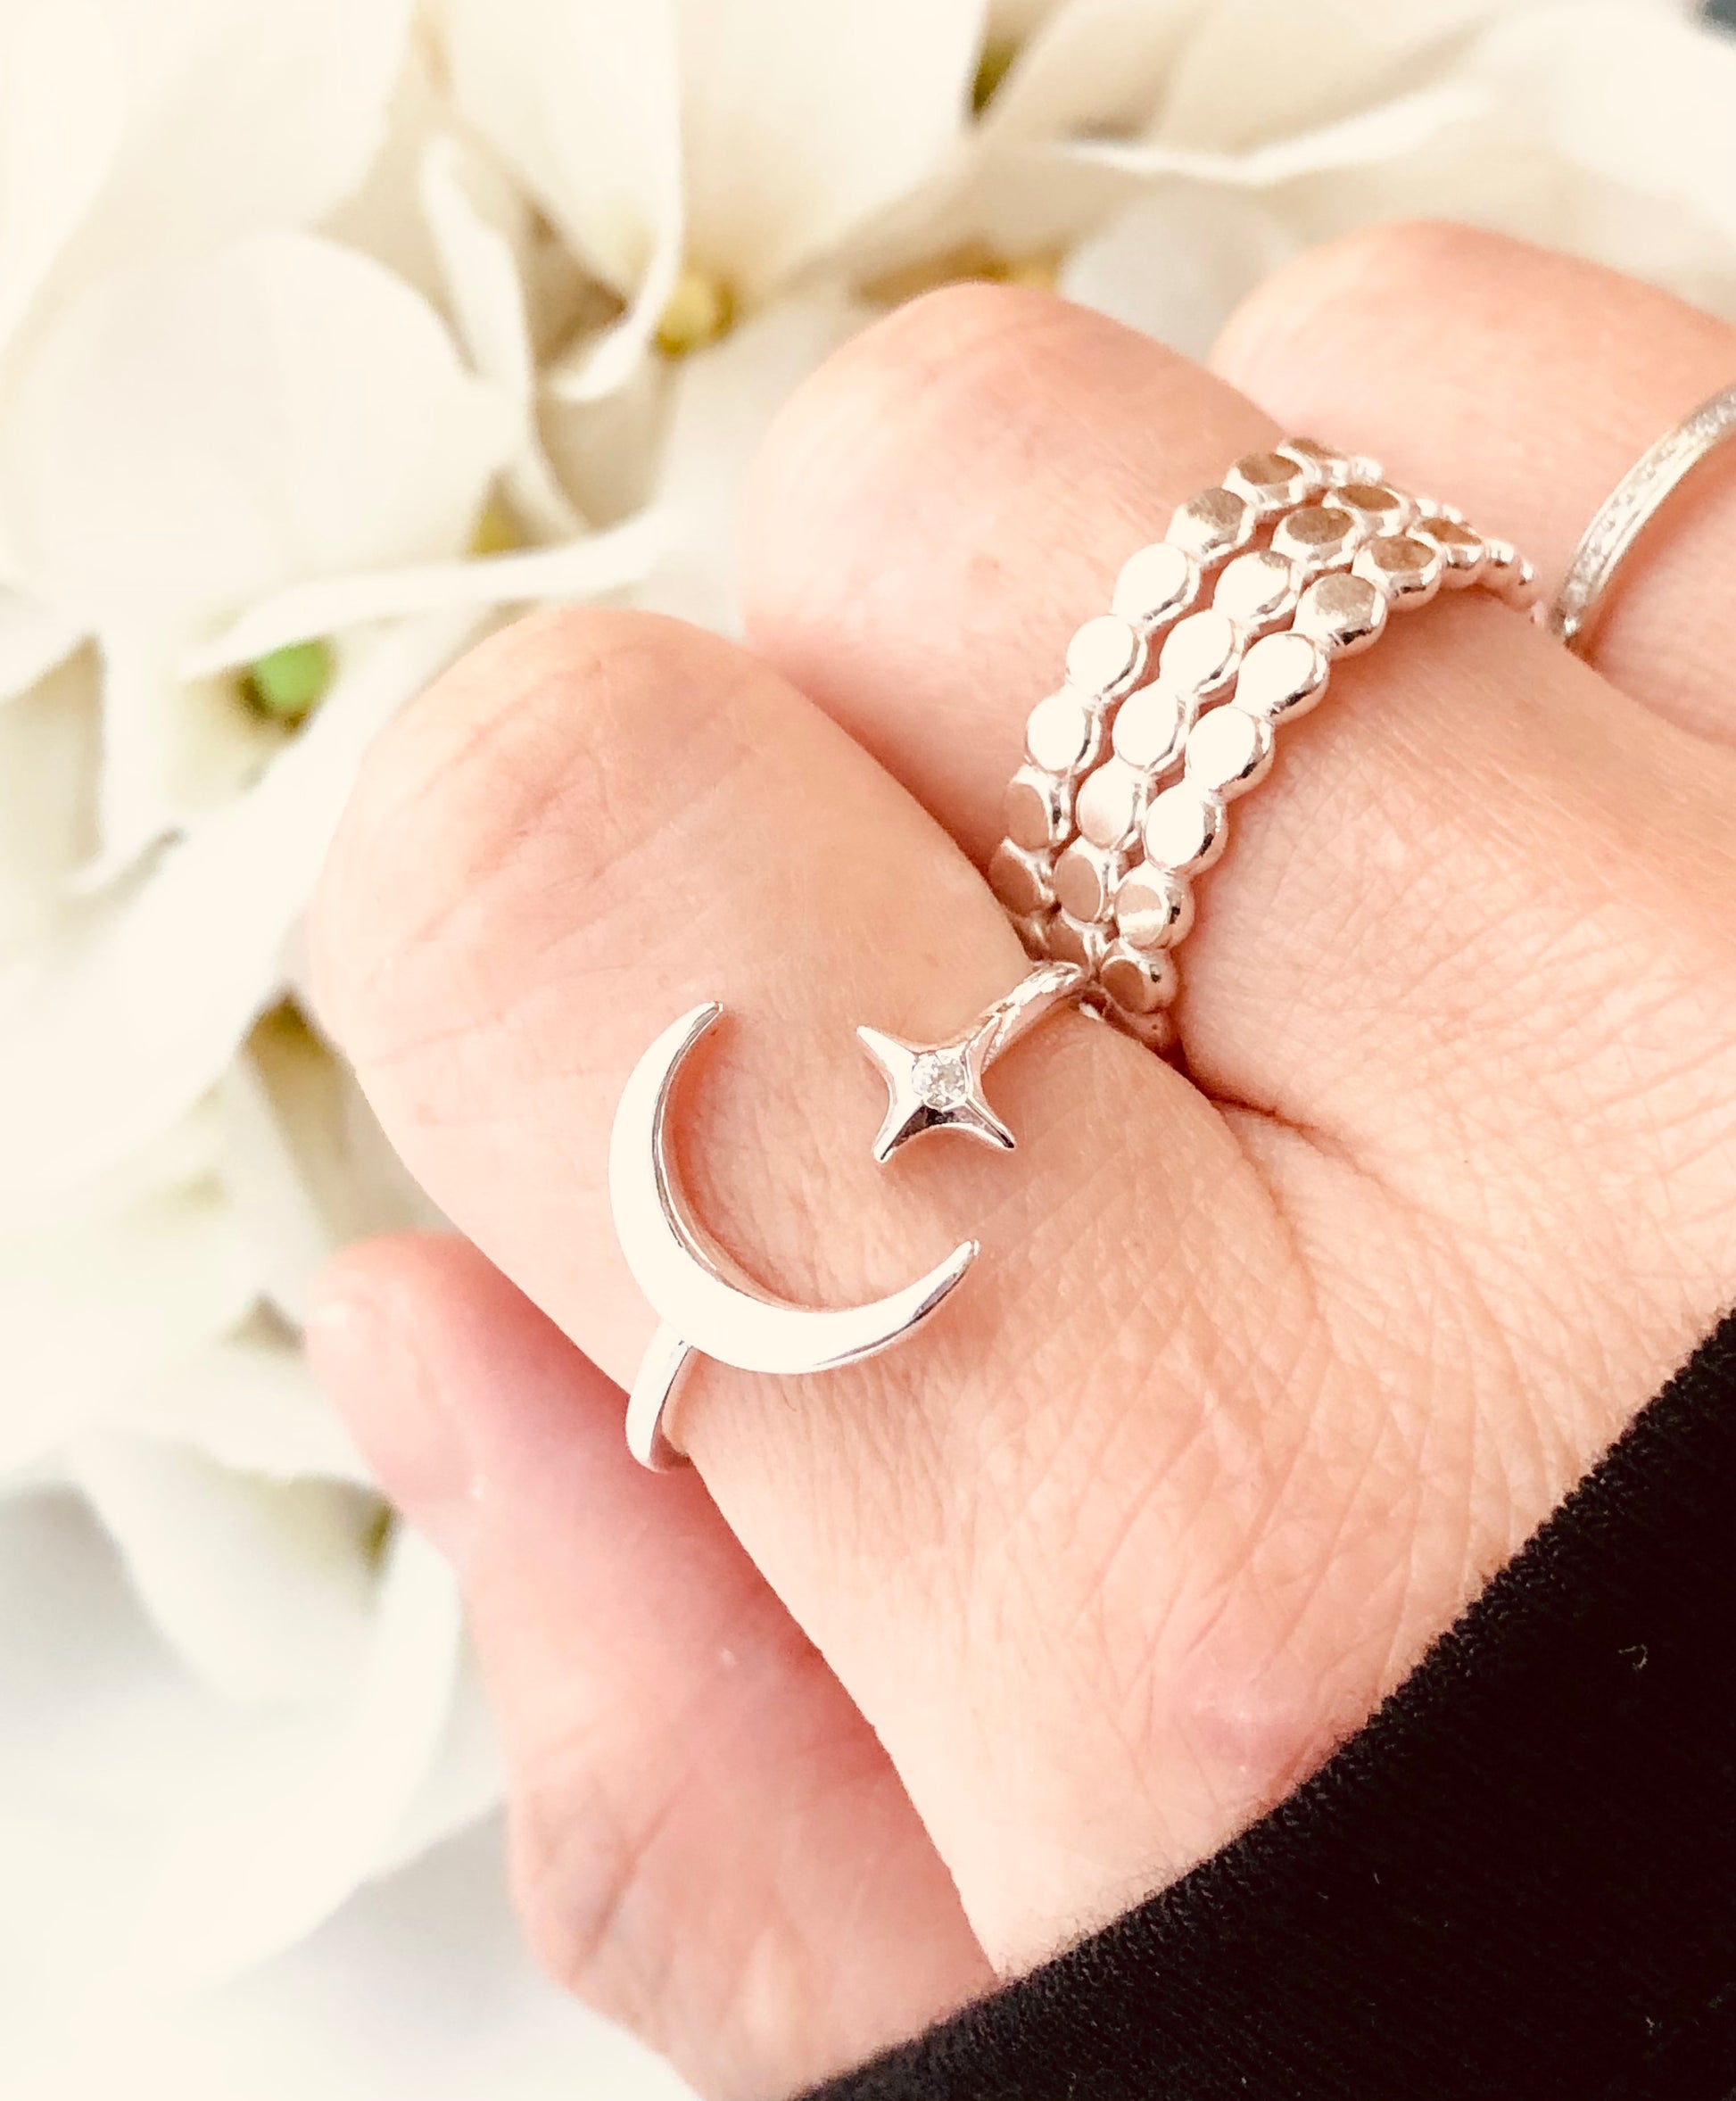 Moon And Star Ring, Celestial Ring, Moon and North Star, Sterling Silver Ring, Crescent Moon Ring, Holiday Gift, Adjustable Moon Ring